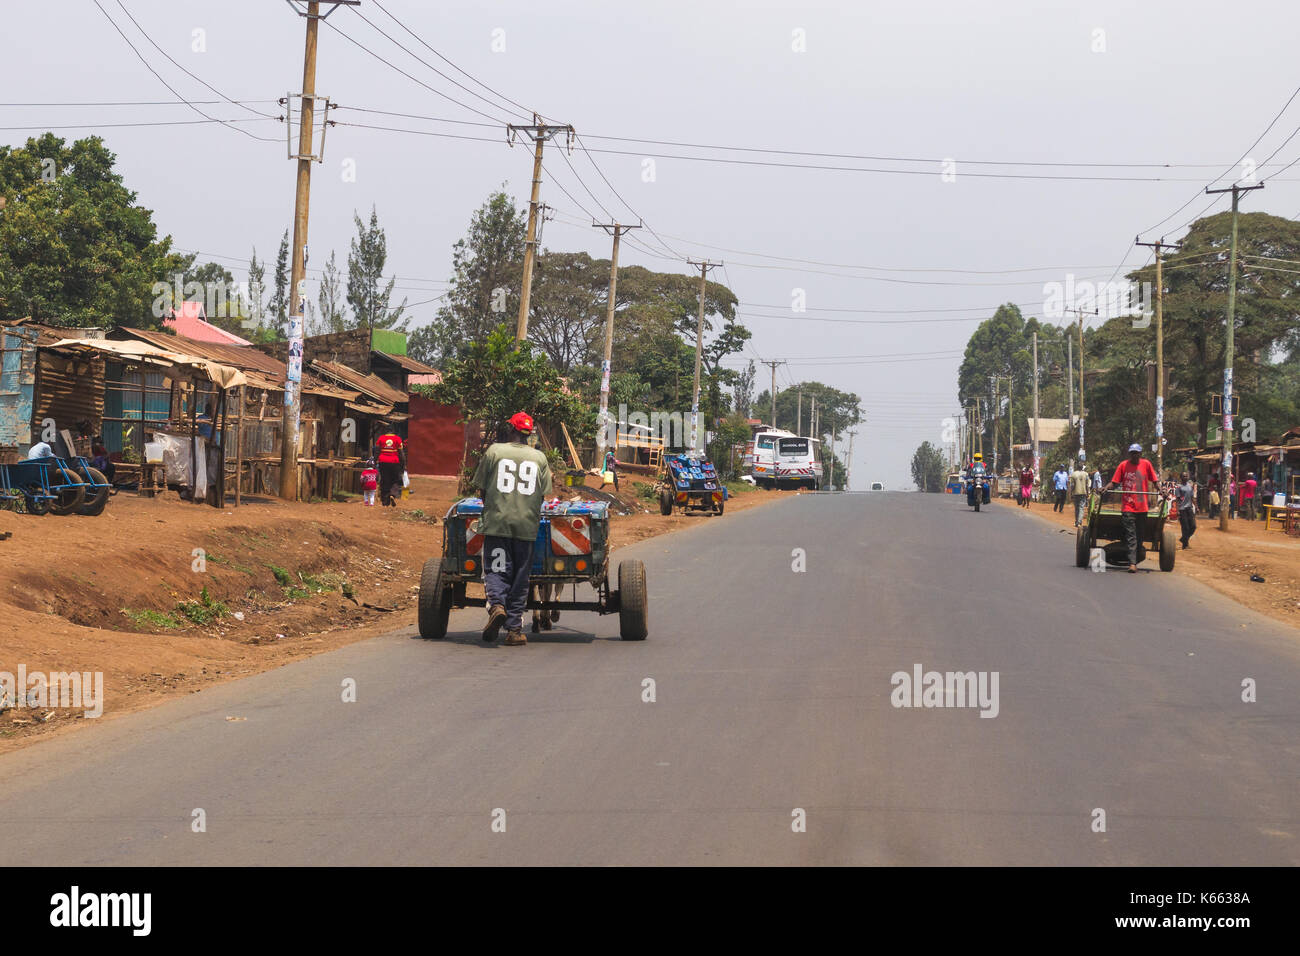 Men pushing carts with water containers down main road of a town, Kenya Stock Photo